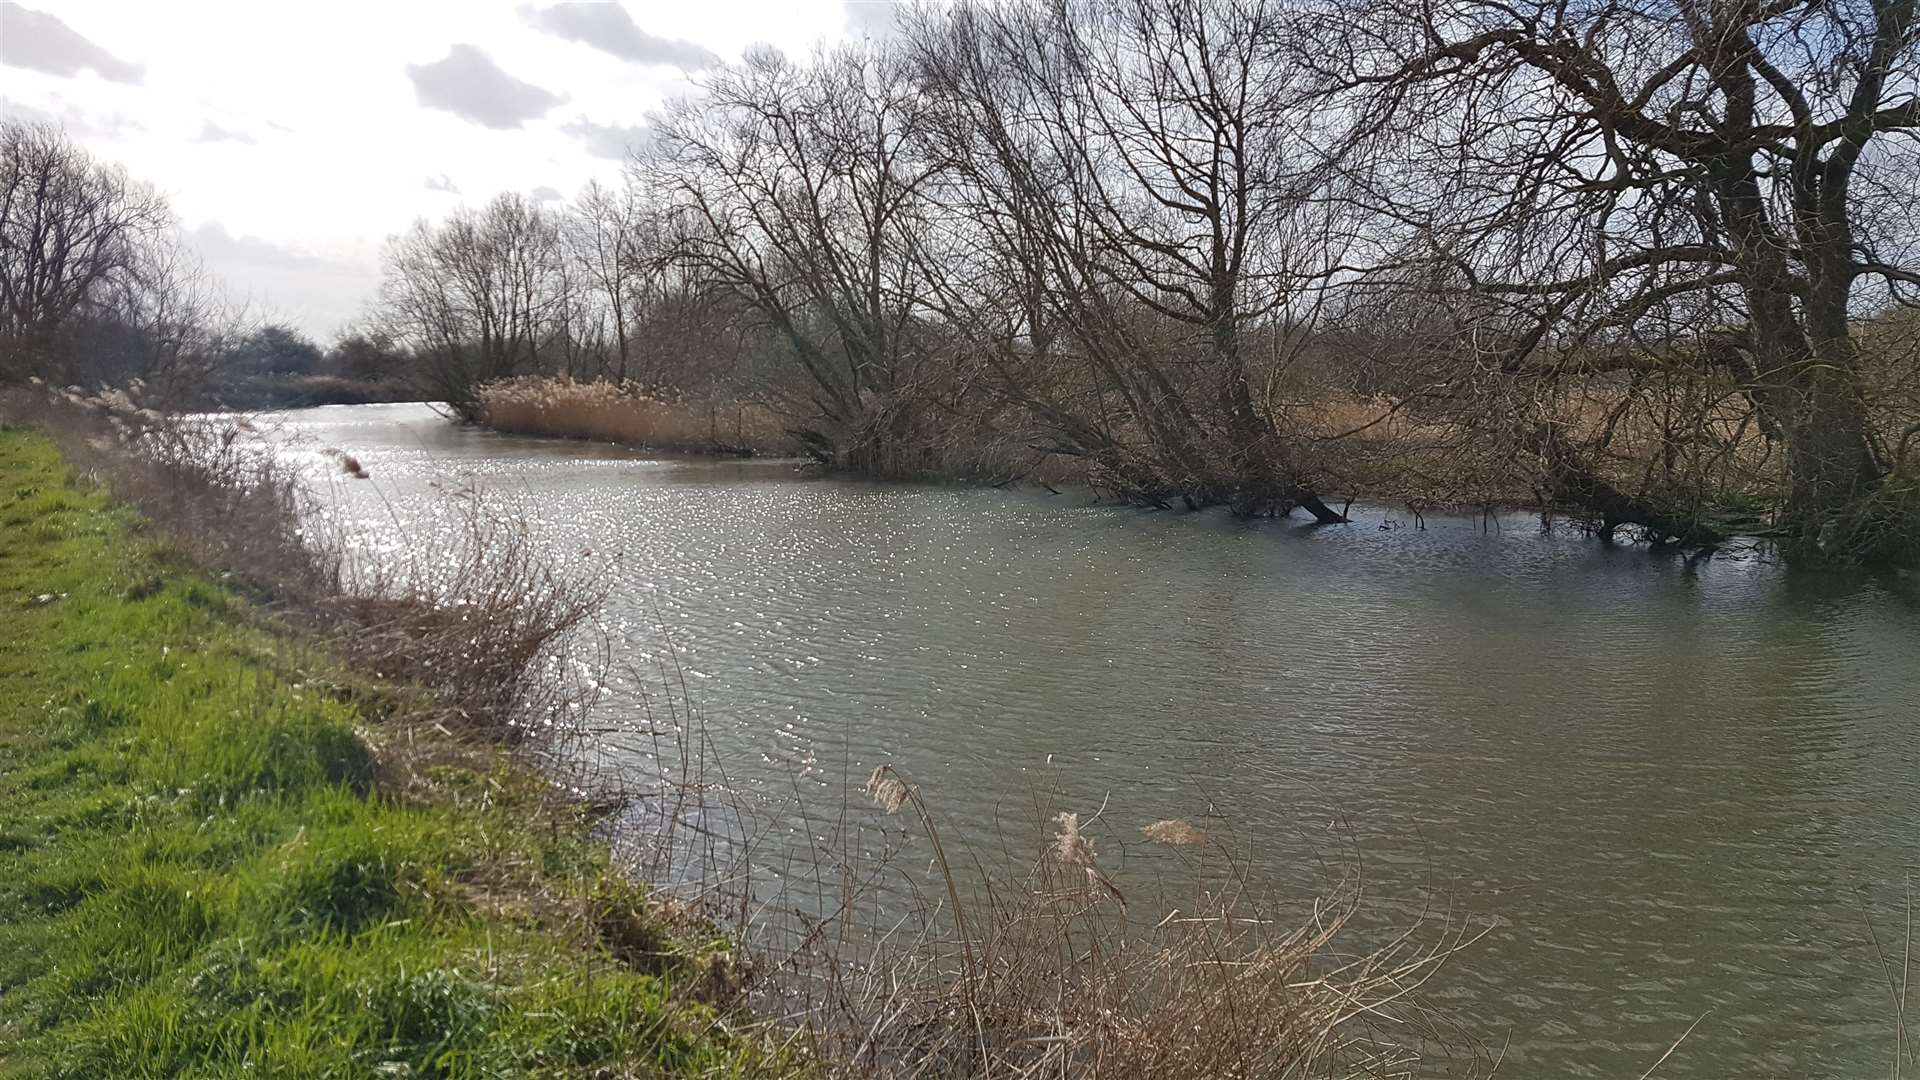 The River Stour flowing through the Canterbury countryside